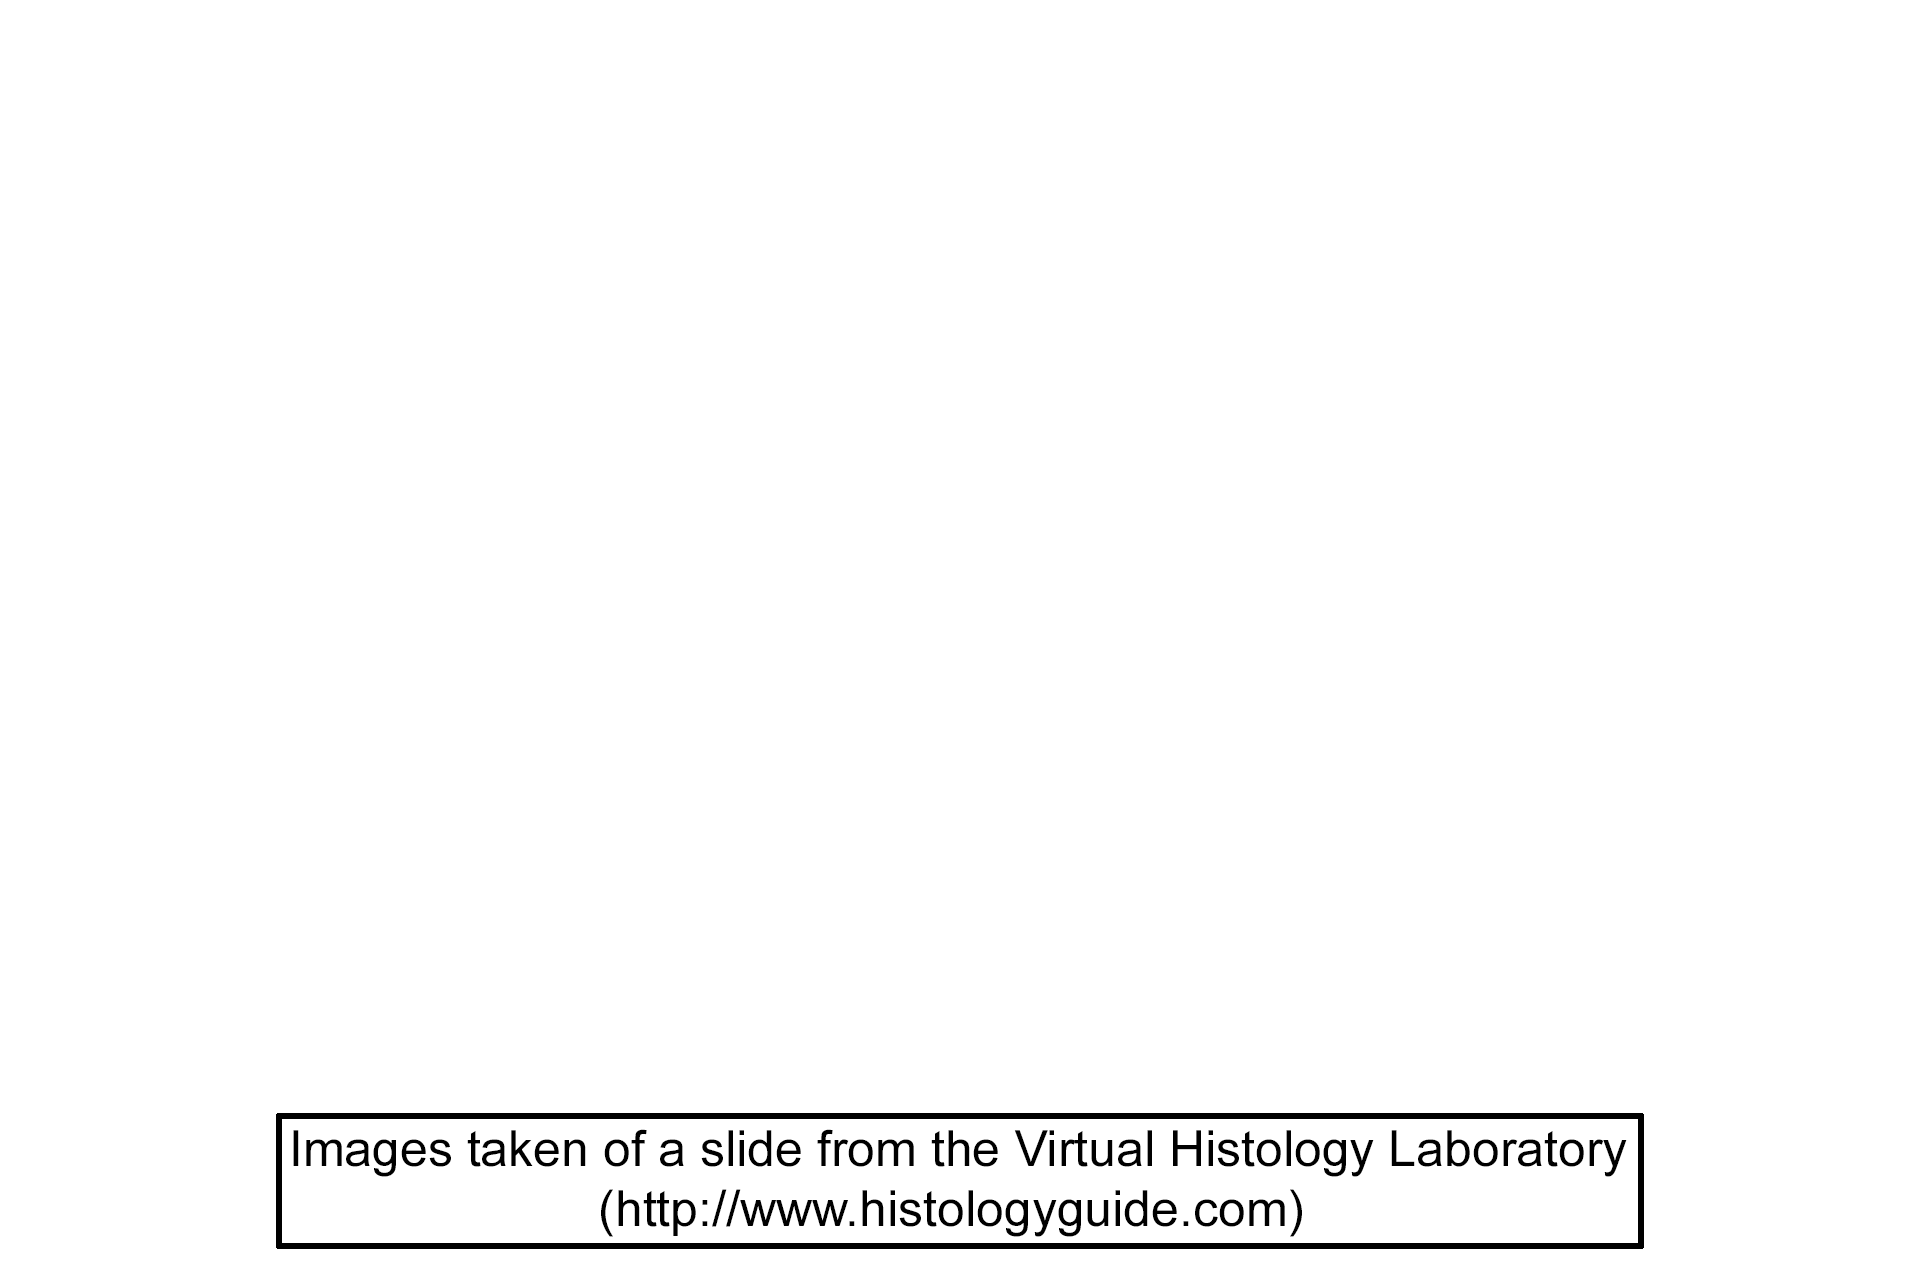 Image source > <p>Image taken of a slide from the Virtual Histology Laboratory.</p>
